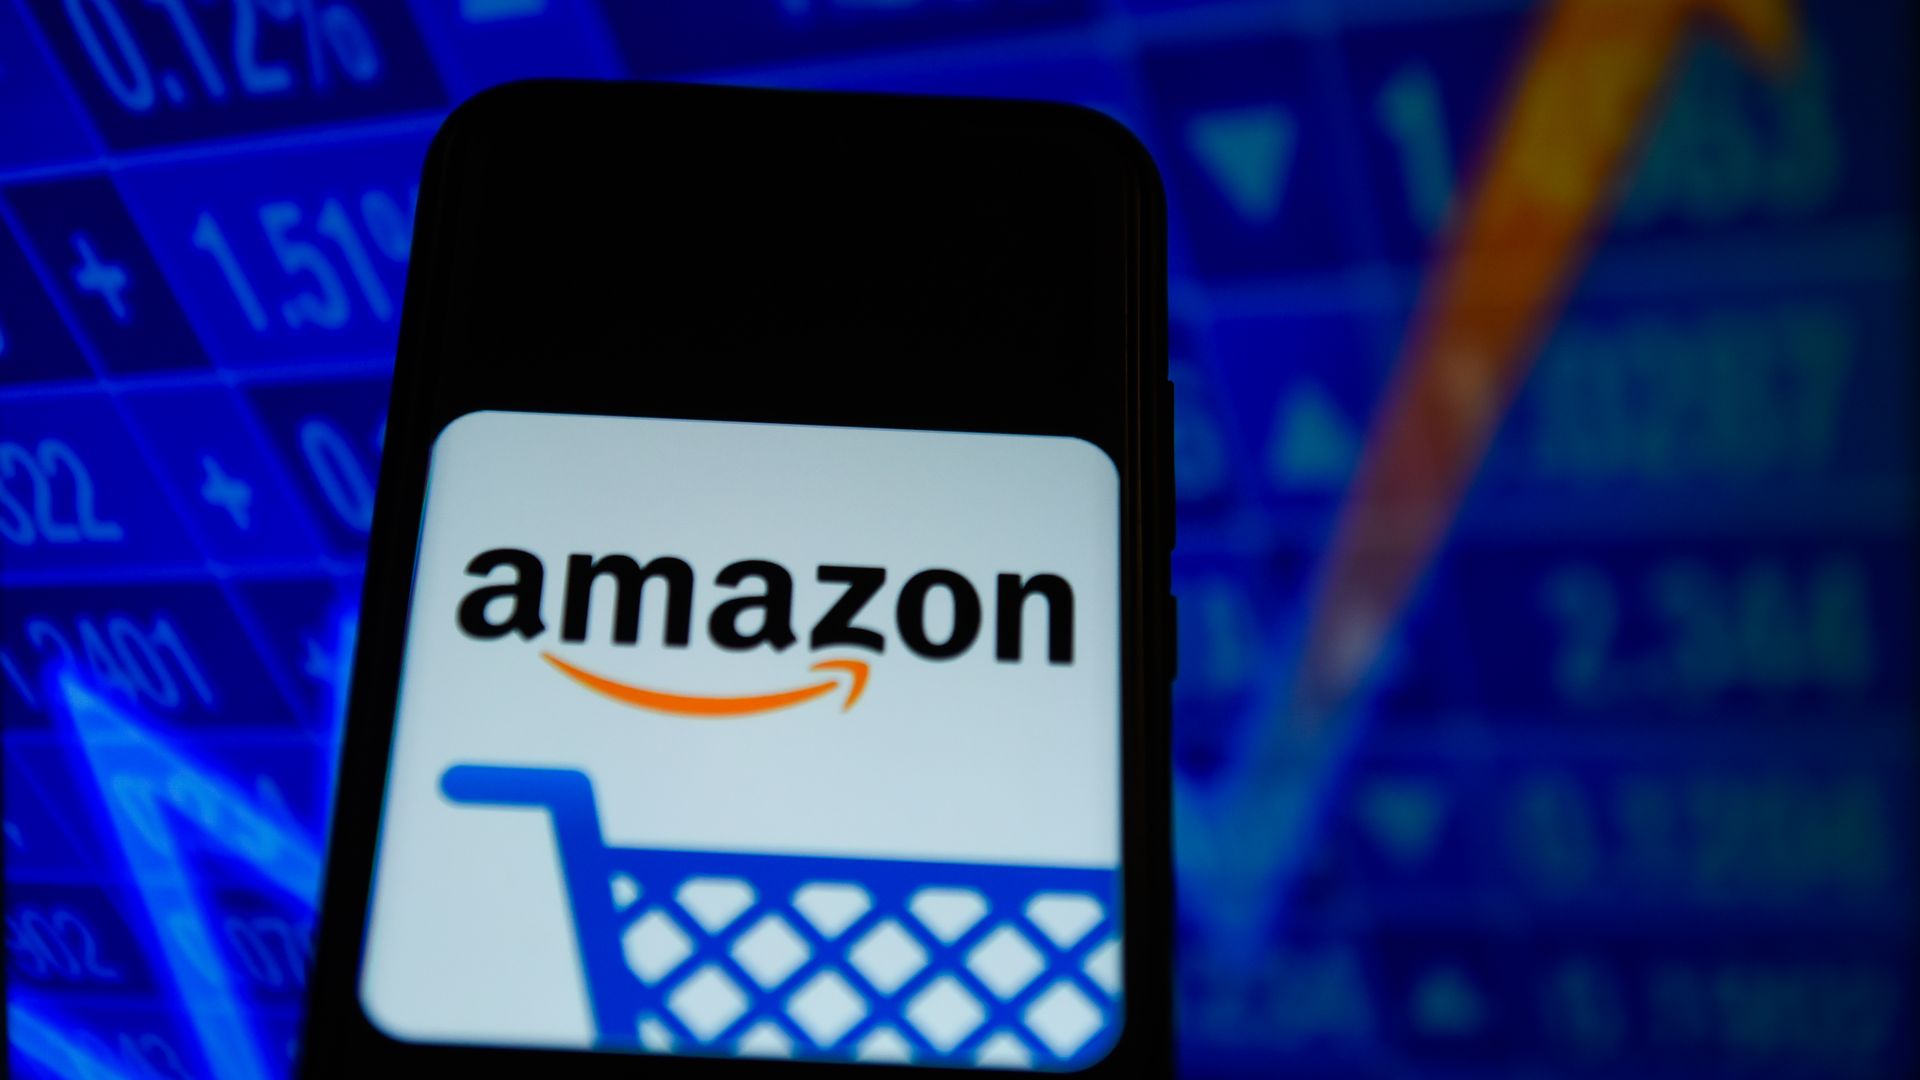 Amazon, Alphabet set to report their corporate earnings this week - Axios